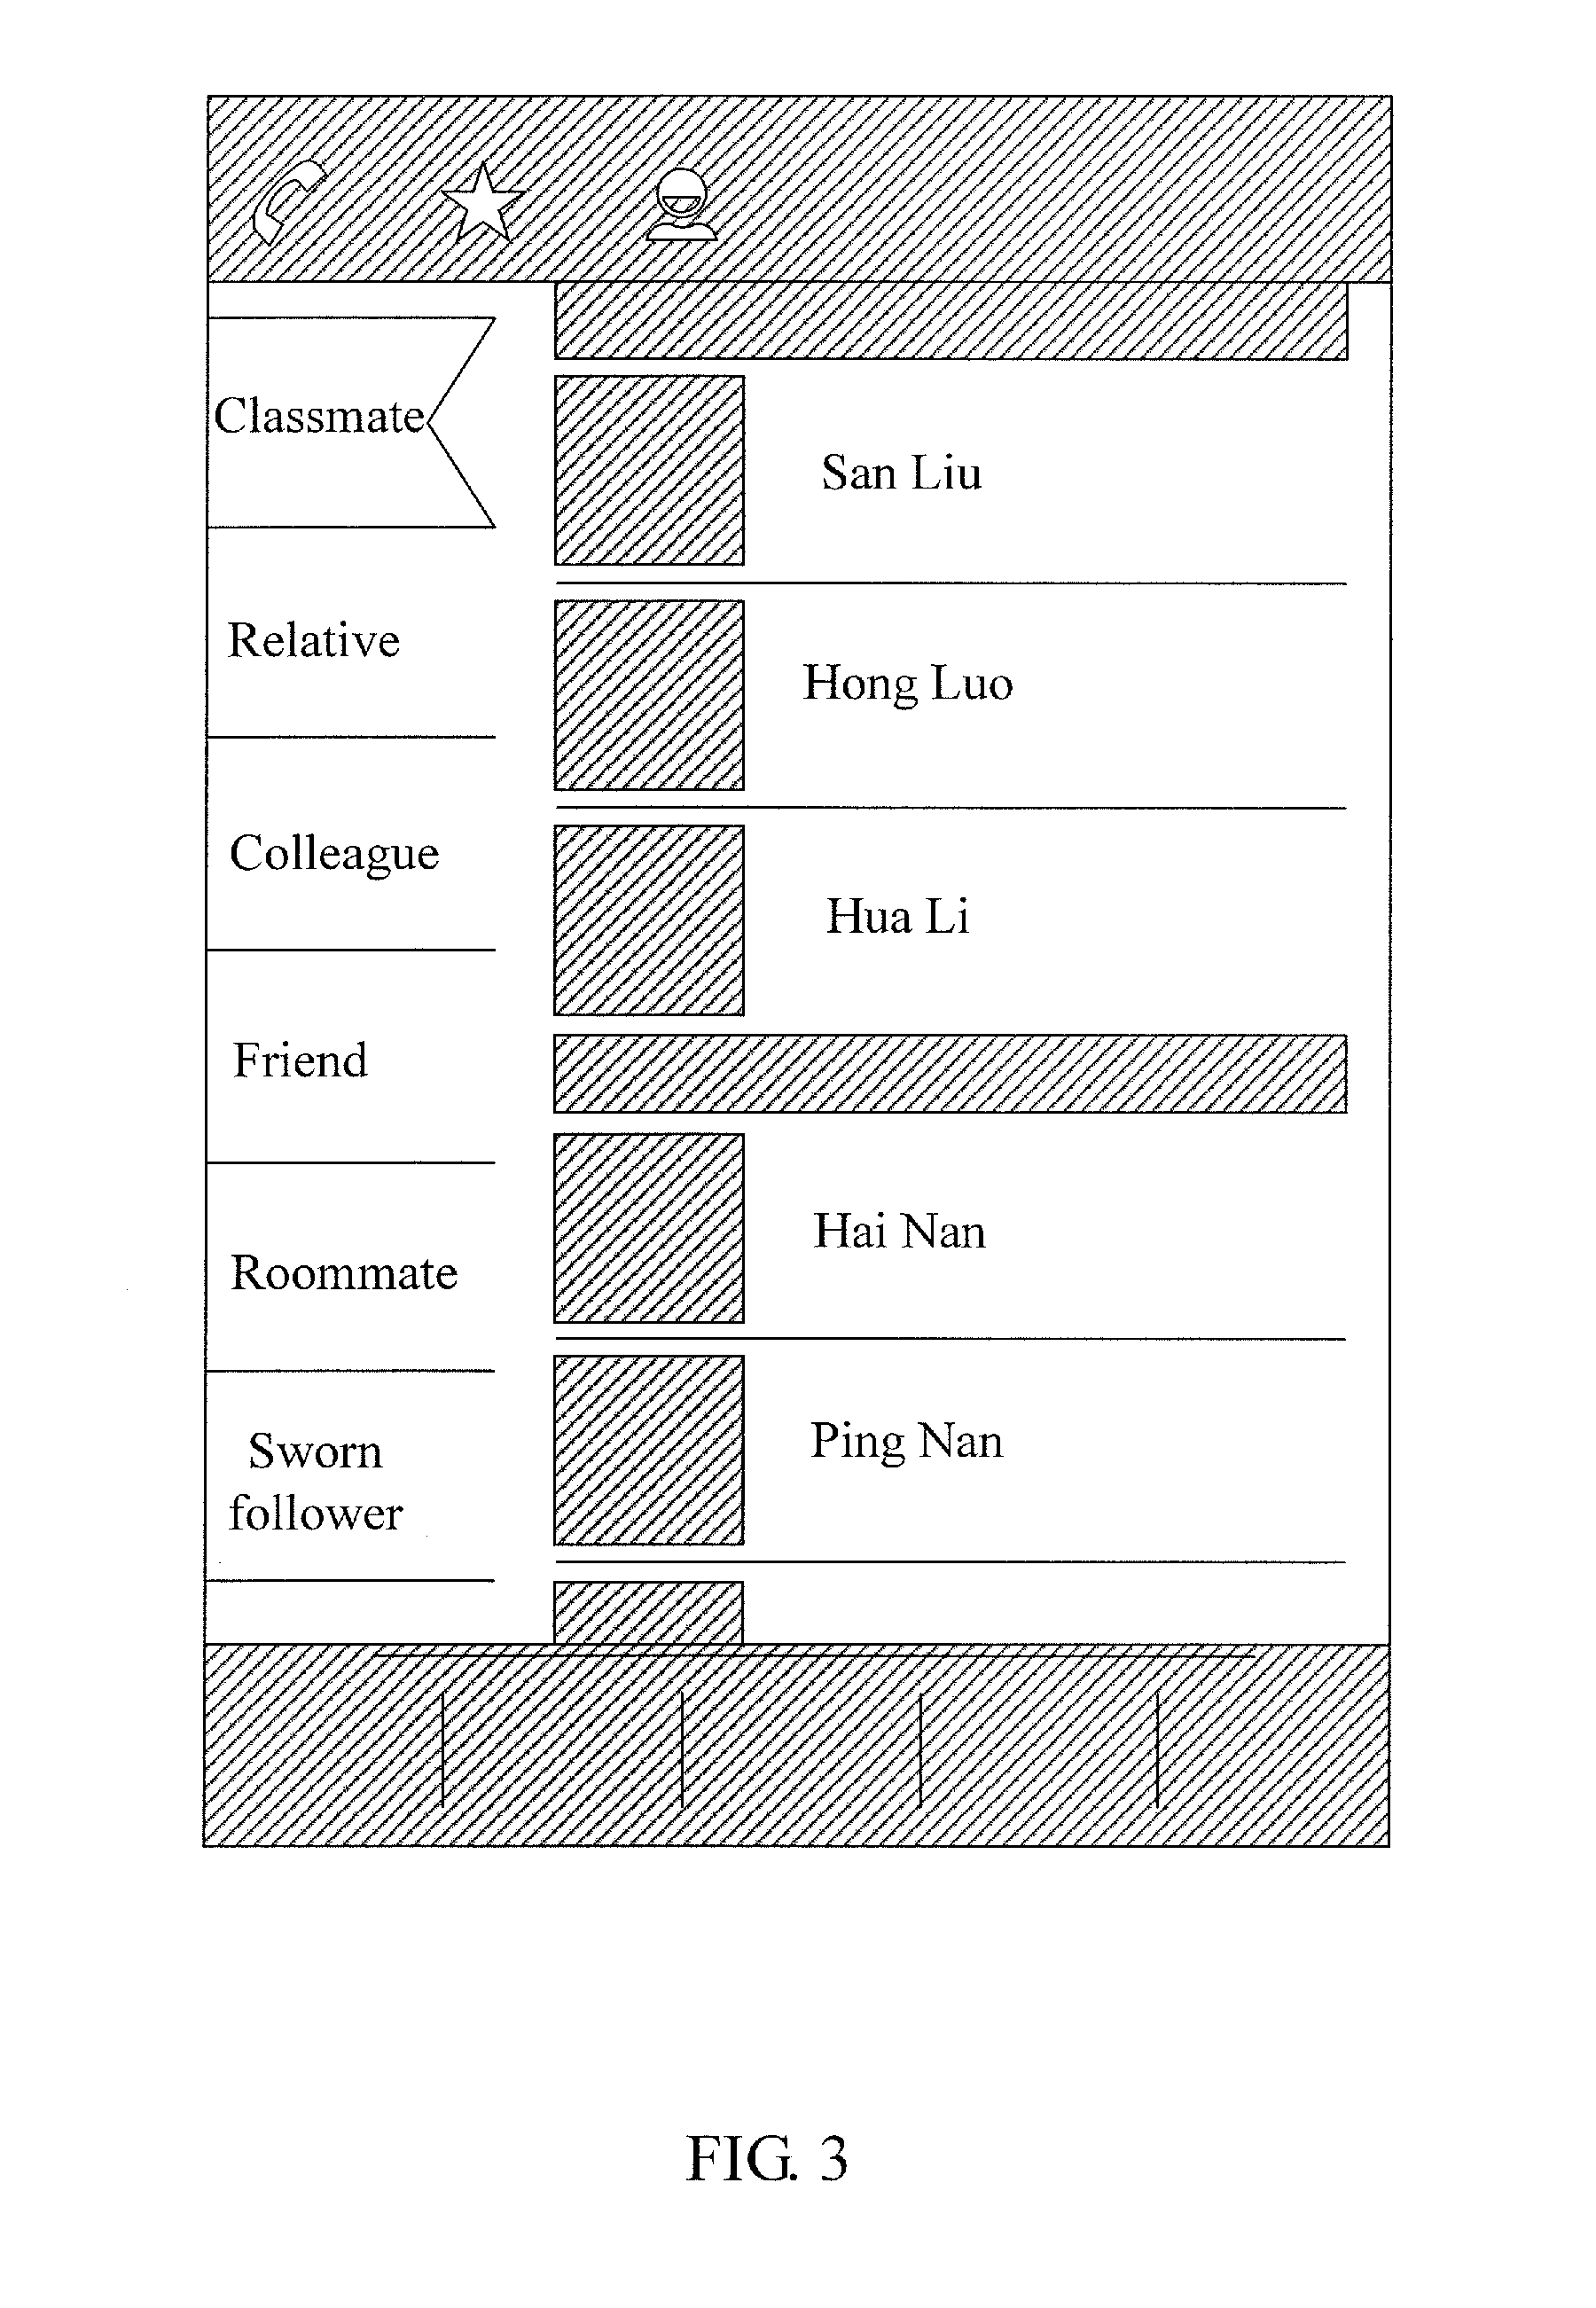 Method and device for processing contact information groups